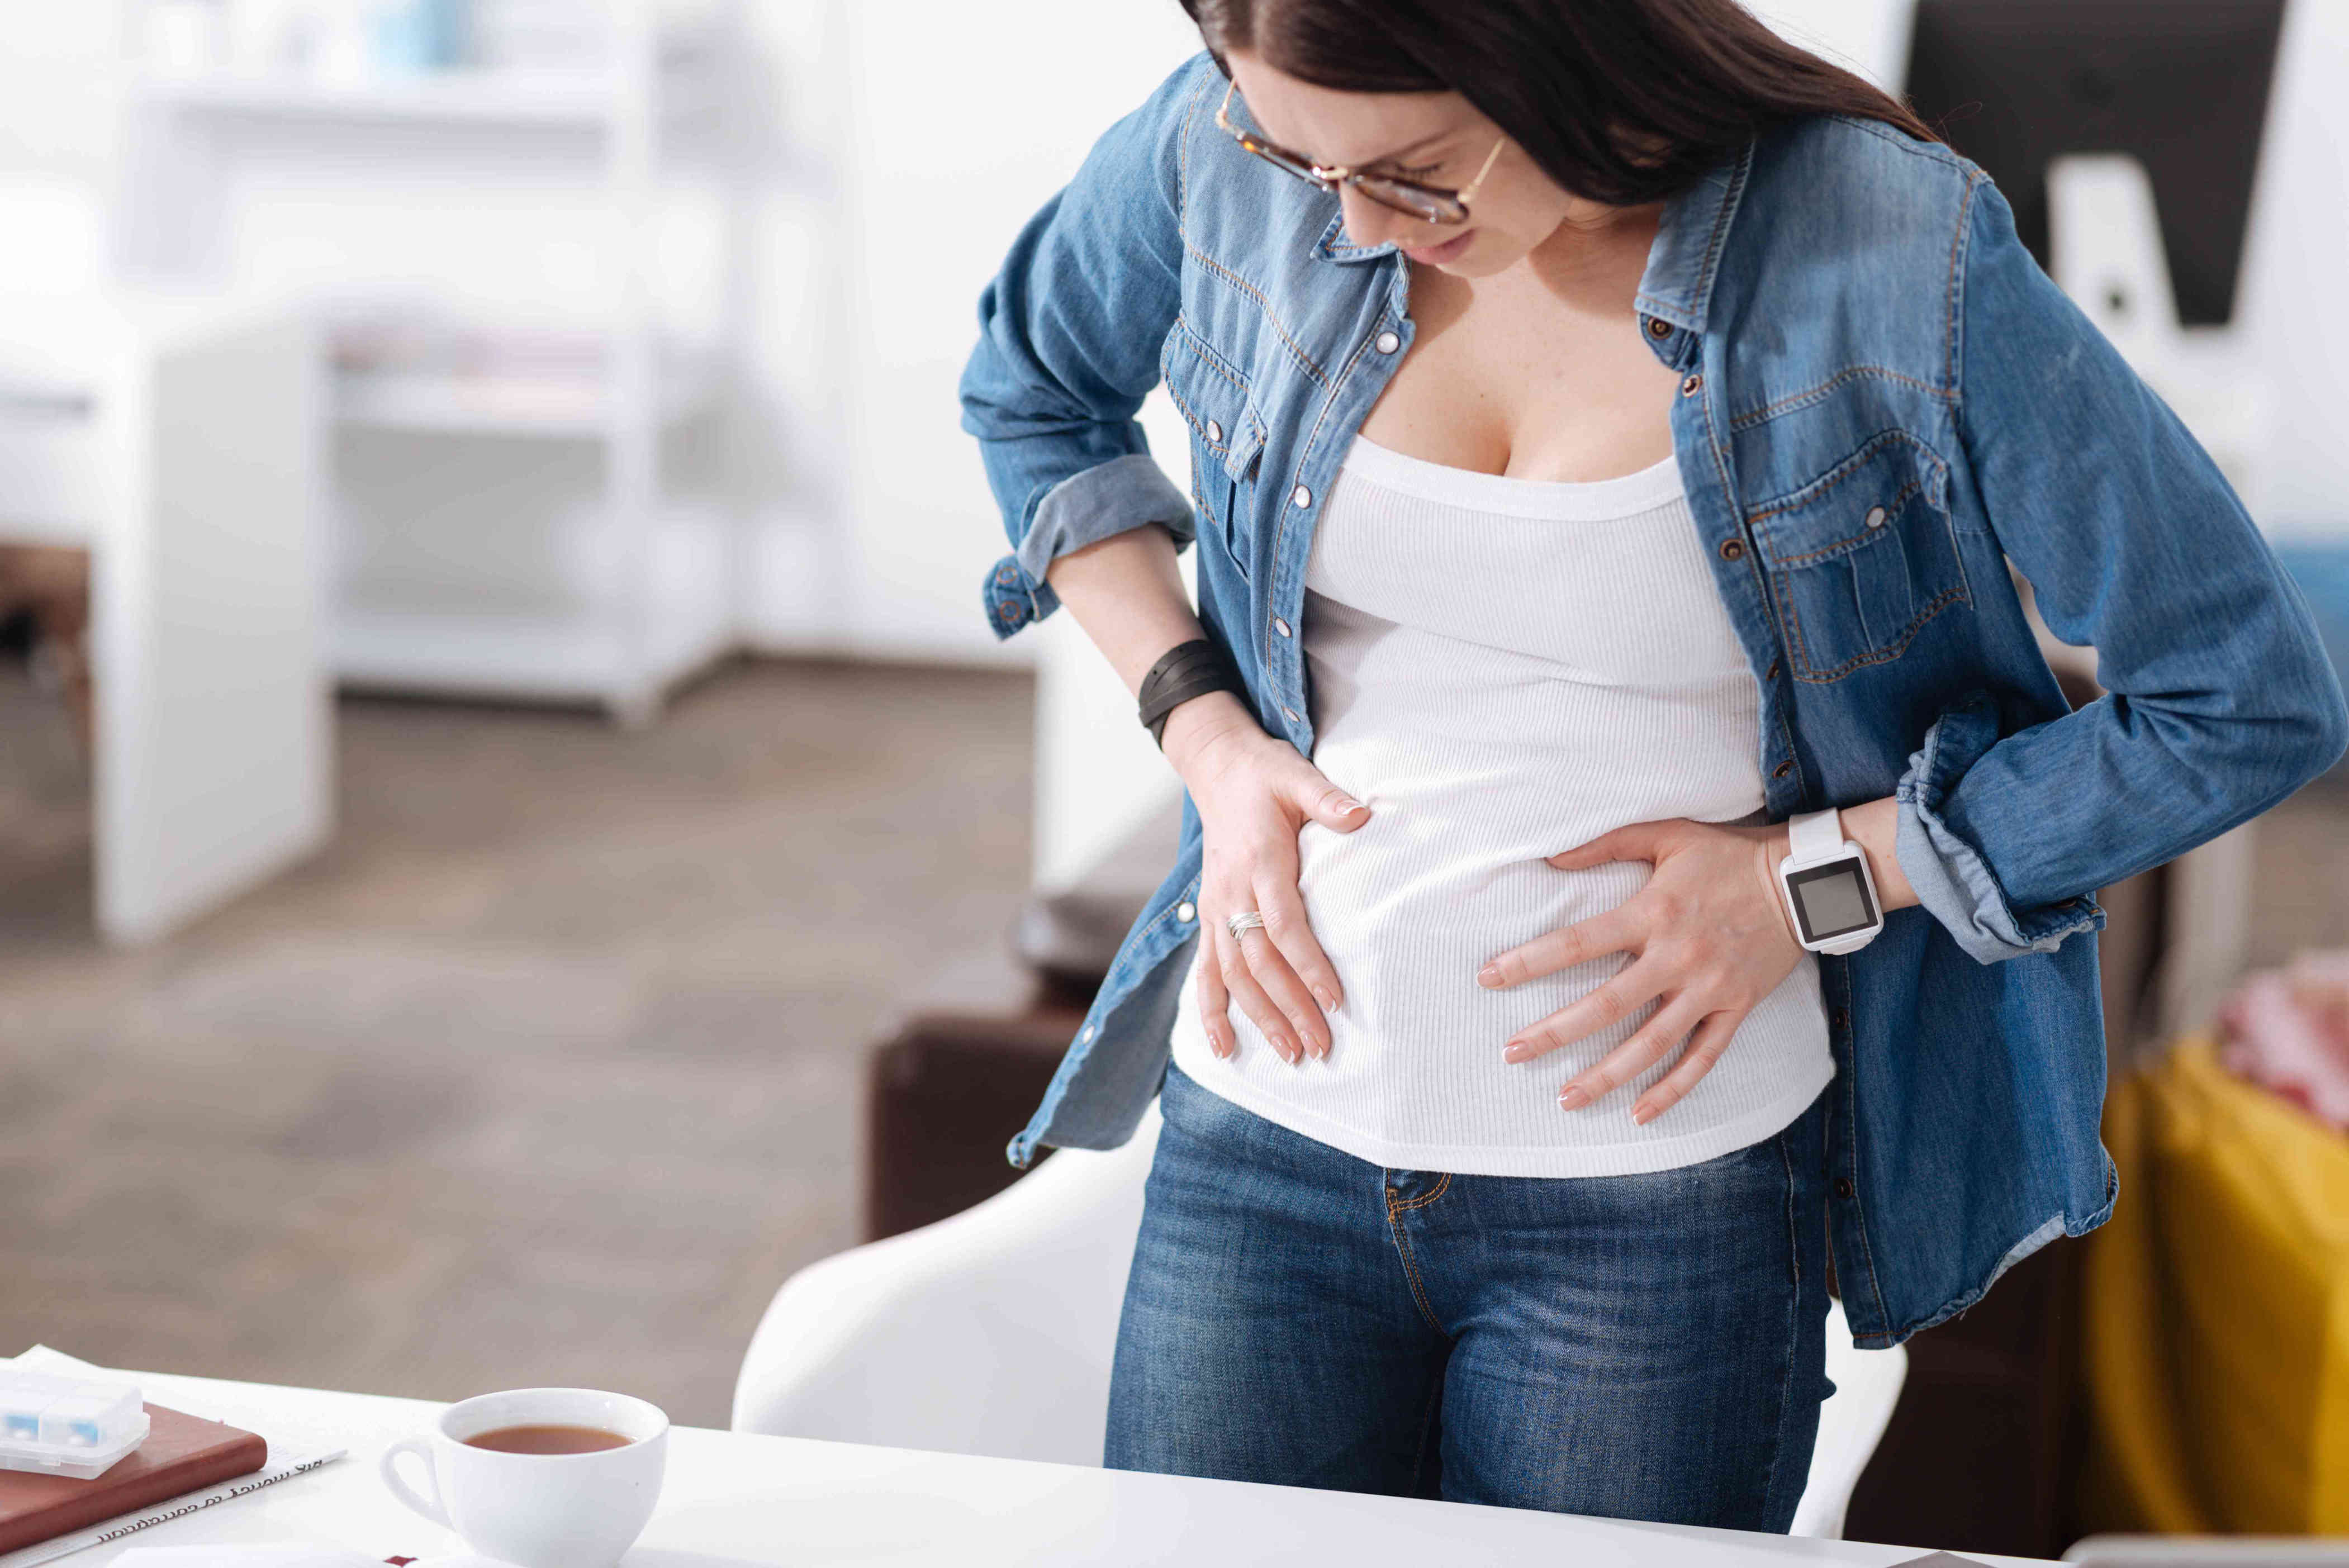 what causes abdominal distension—and how can you treat it?